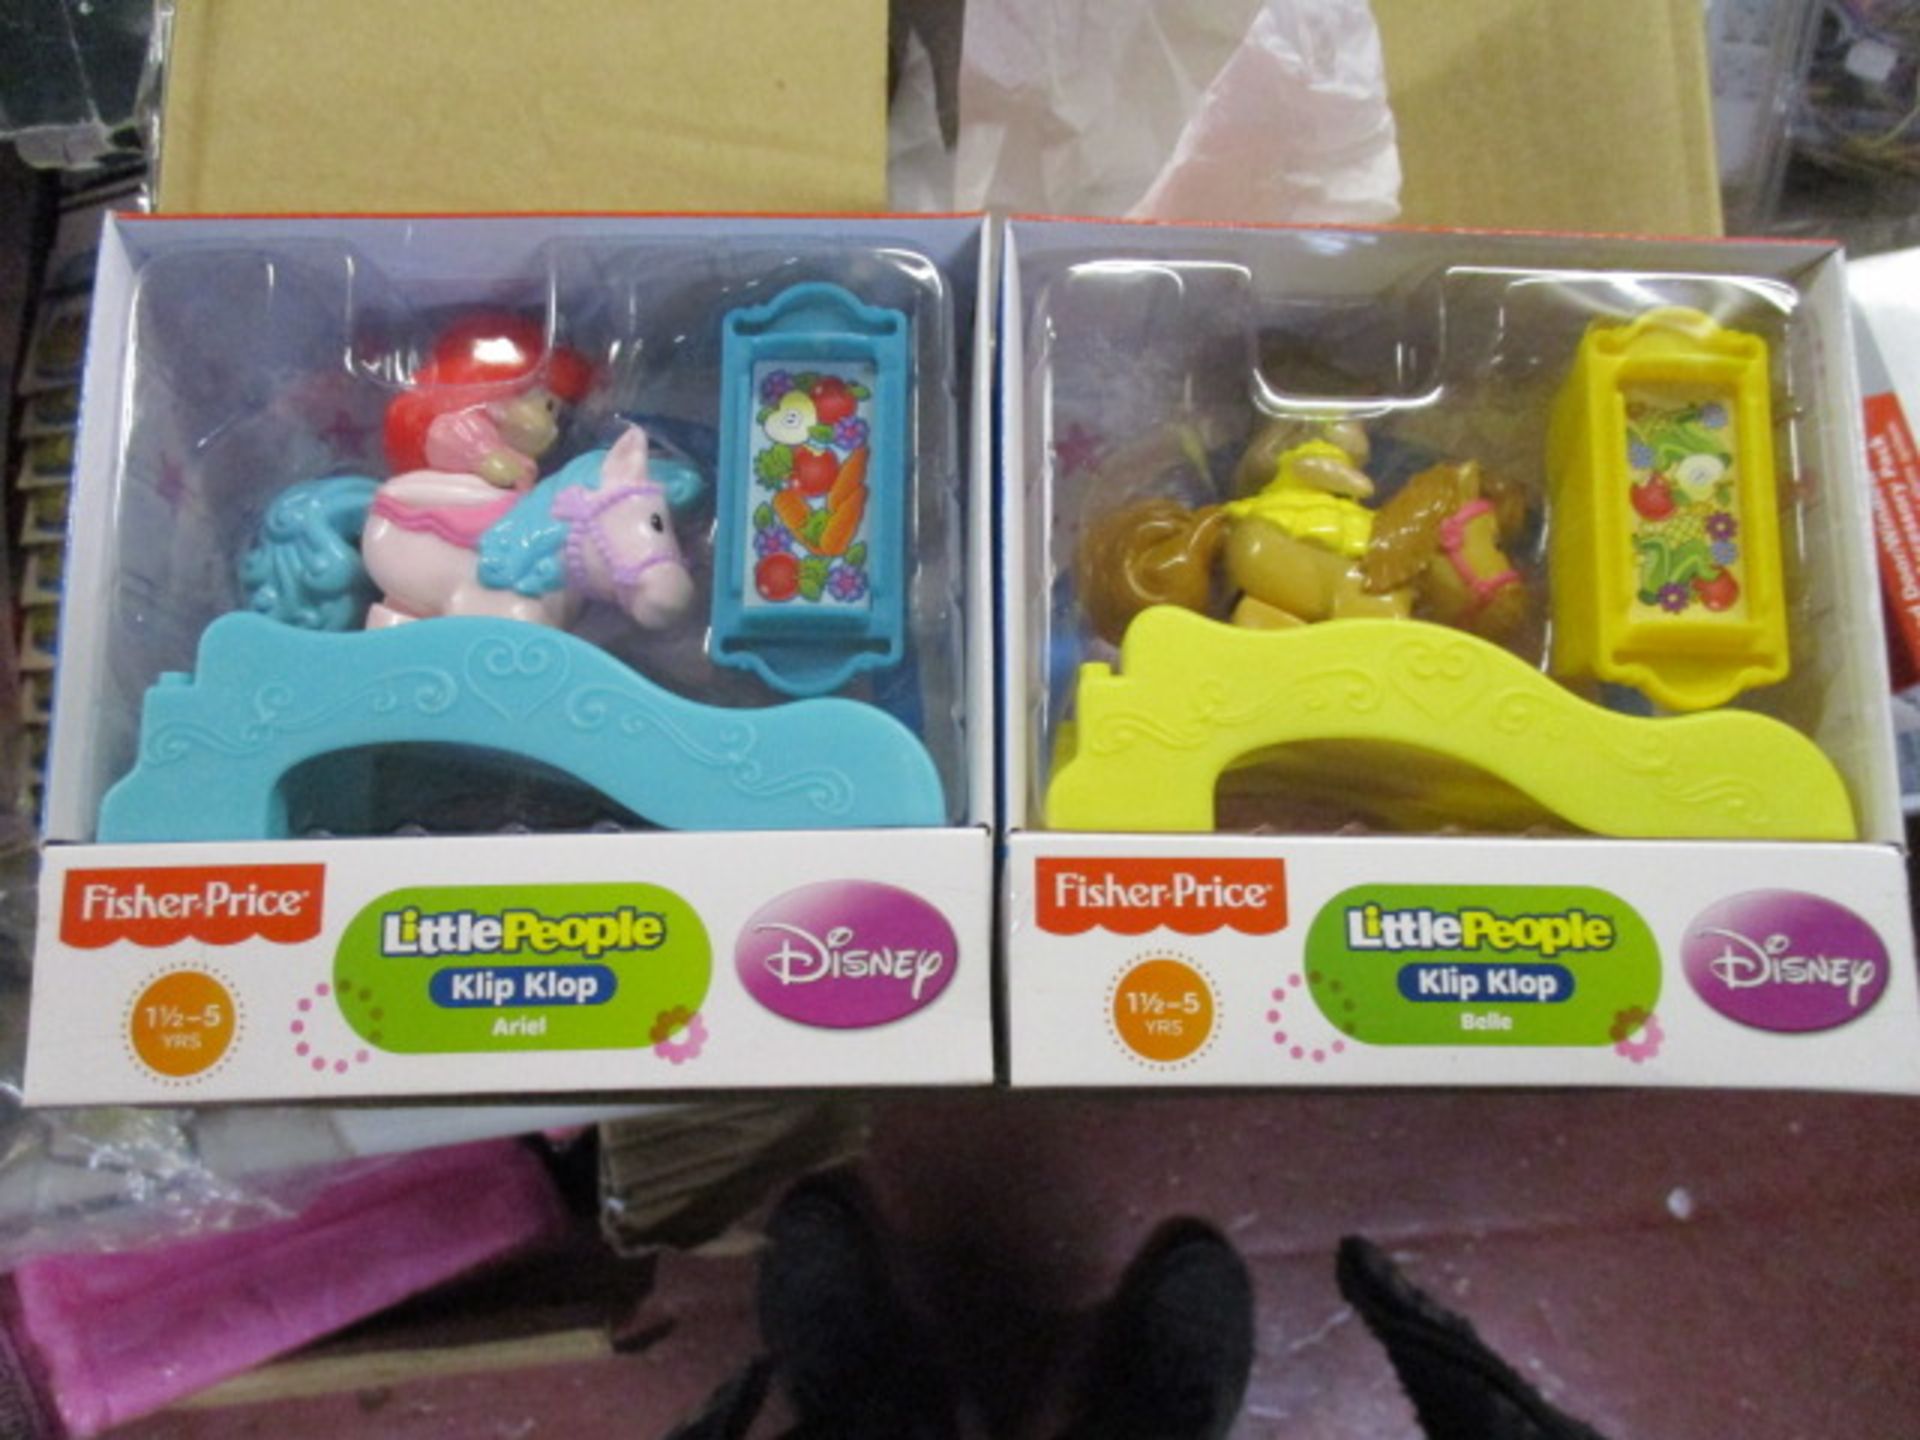 New and sealed Fisher price little people klip klop assorted colours will be picked at random